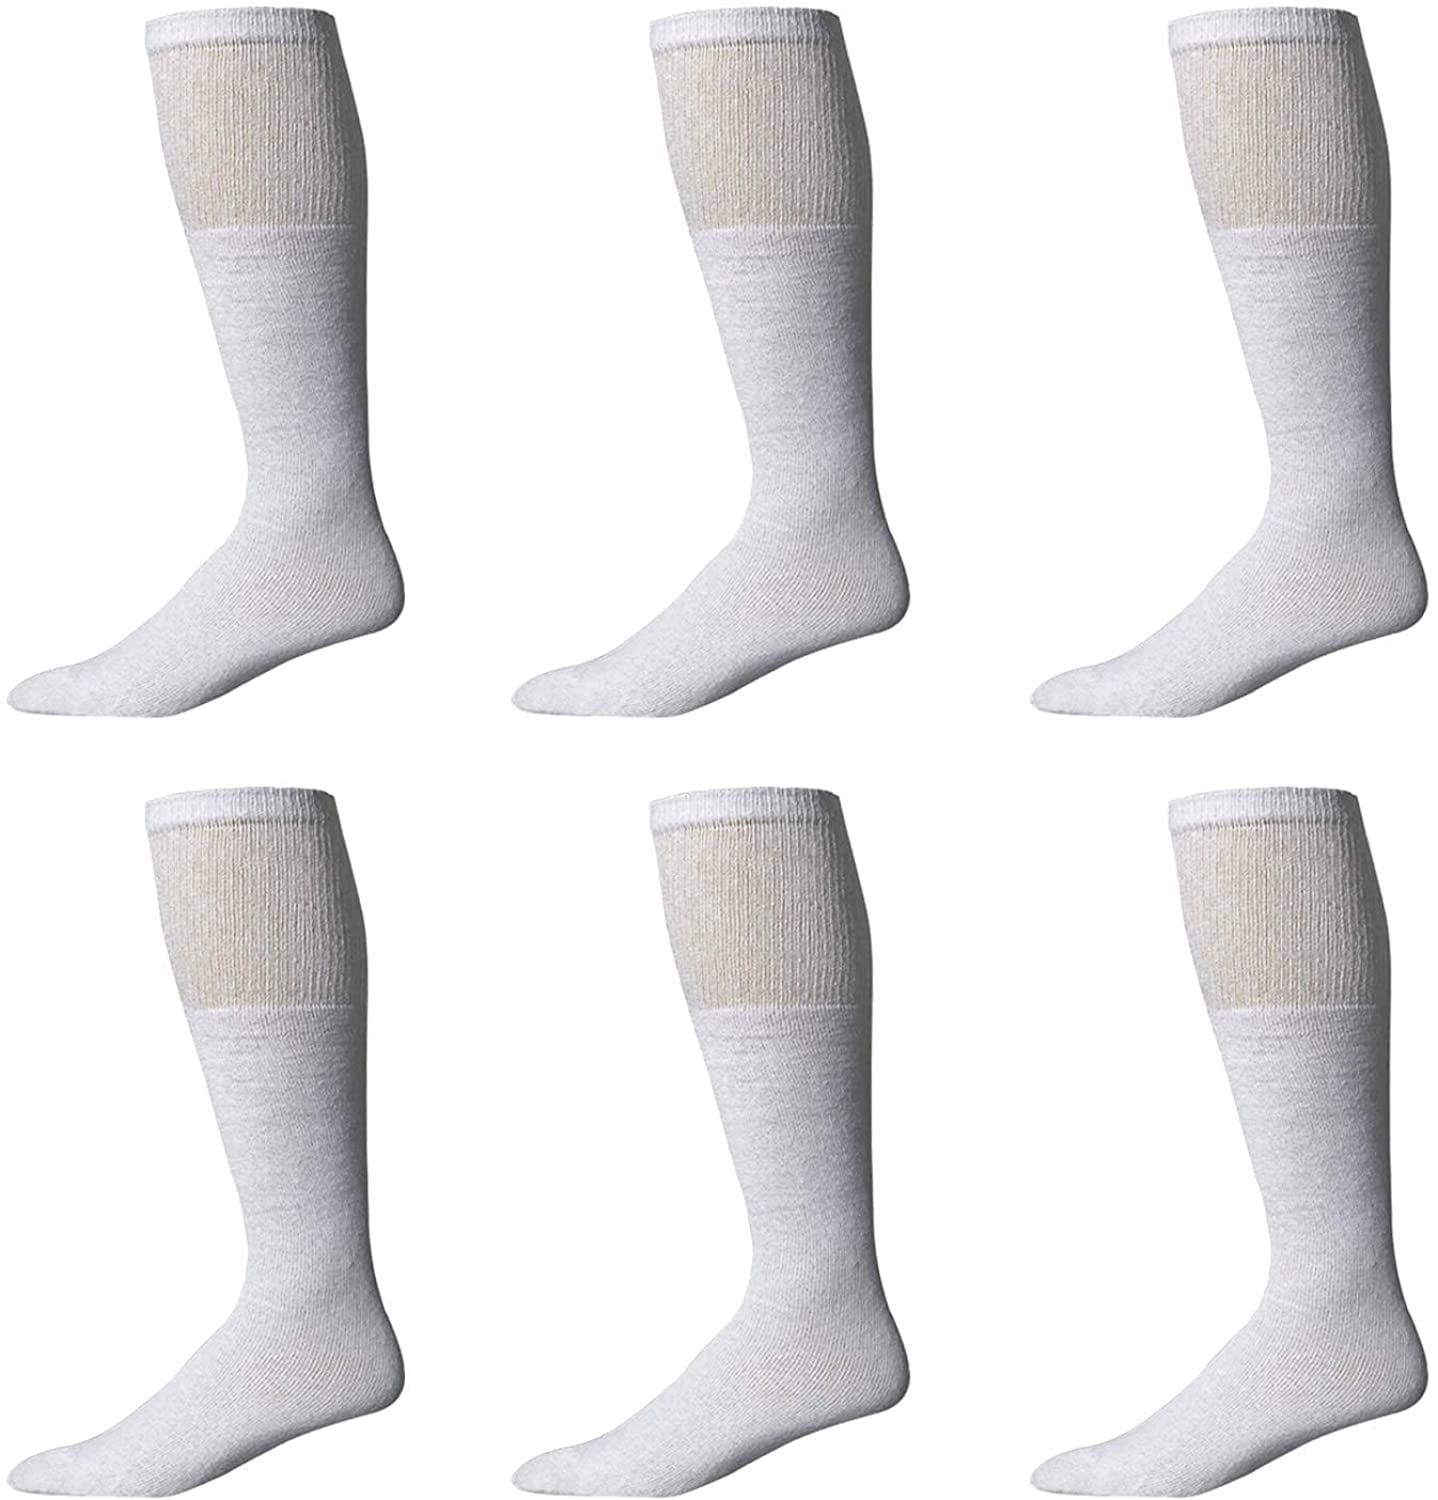 zrshygs 5 Pairs Of Simple Childrens Cotton Tube In Pure White Socks Boy Girl Sports Breathable Socks S